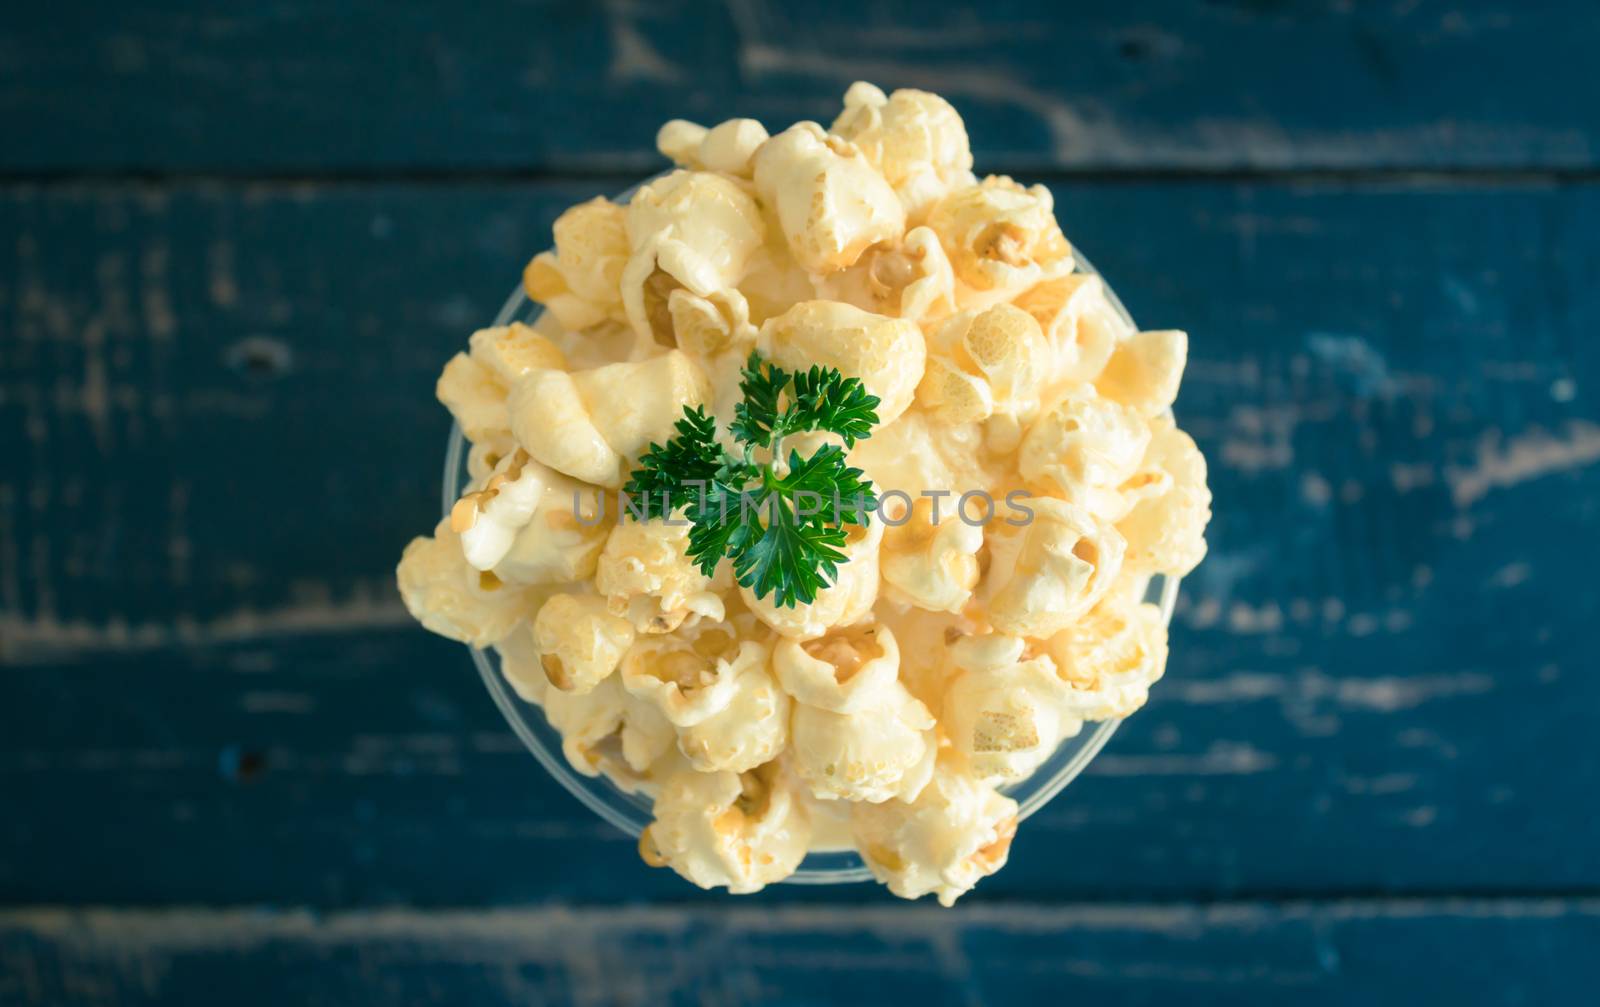 Sweet Caramel Popcorn and Whipped Cream and Fresh Milk with Pars by steafpong